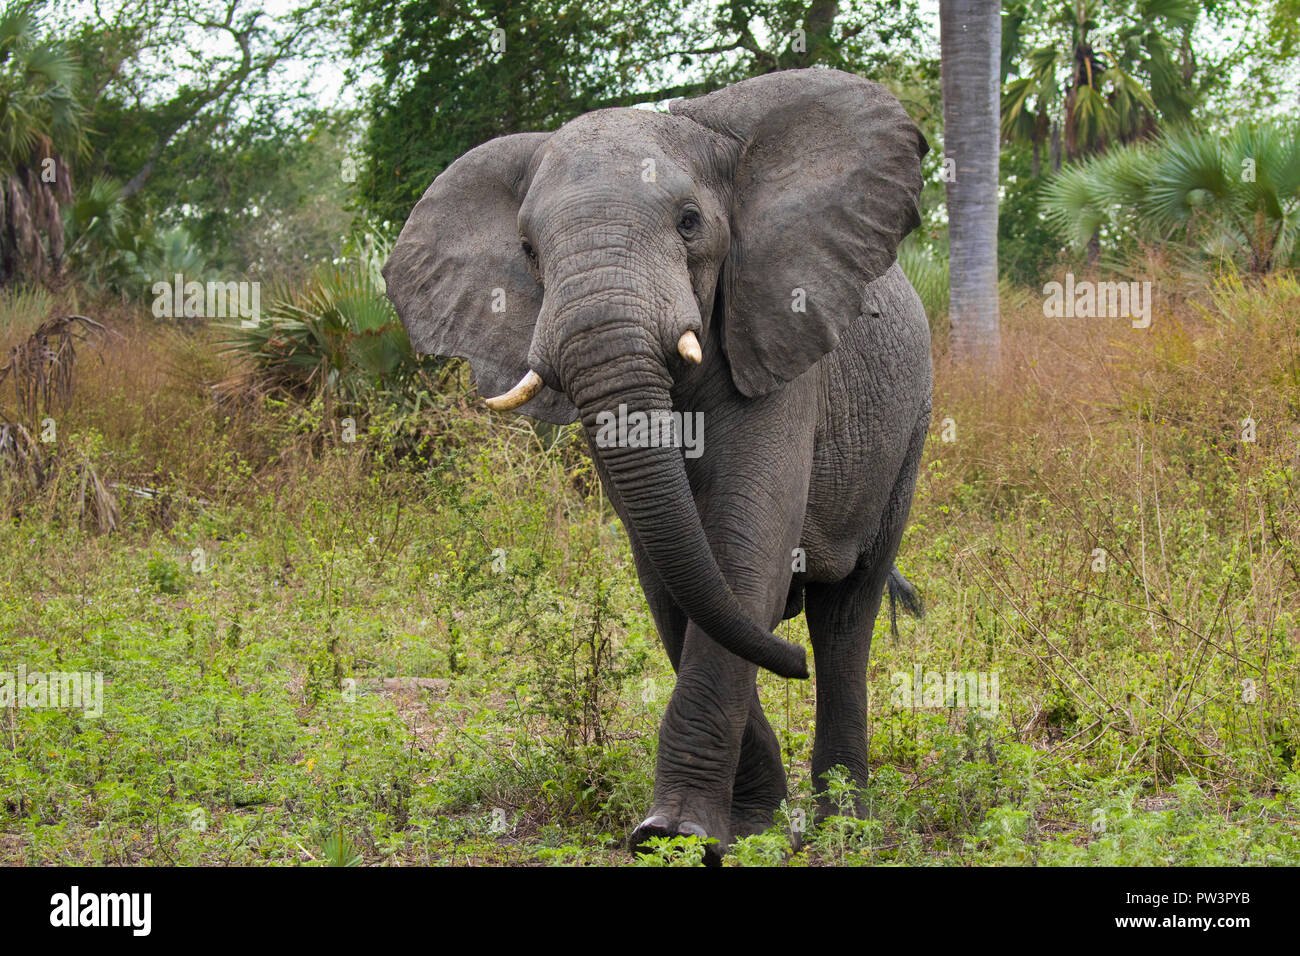 AFRICAN ELEPHANT (Loxodonta africana) male threat display, Gorongosa National Park, Mozambique. Vulnerable species Stock Photo